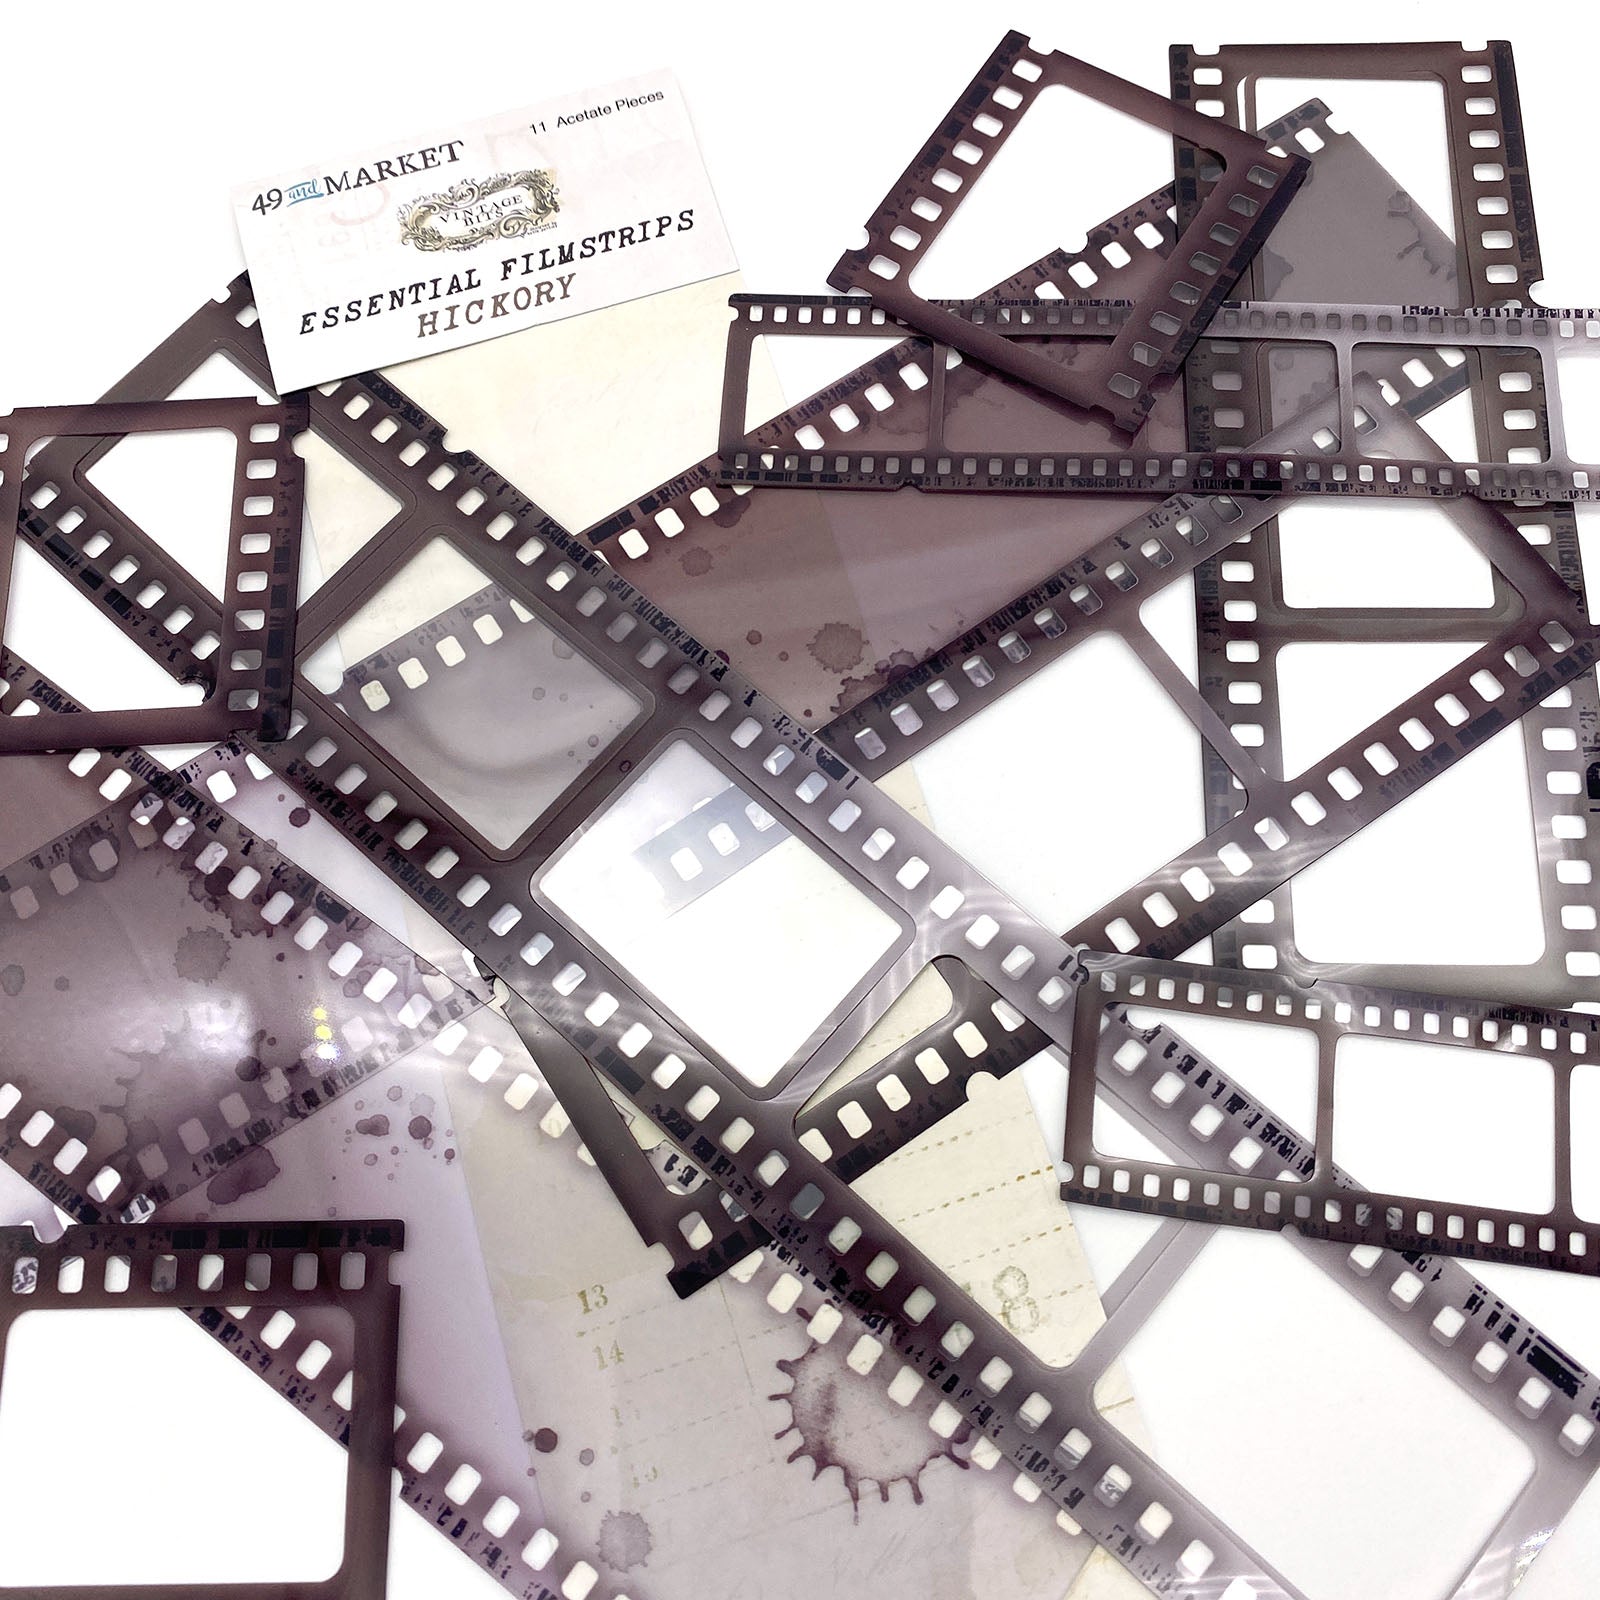 49 and Market Essential Film Strips - Hickory